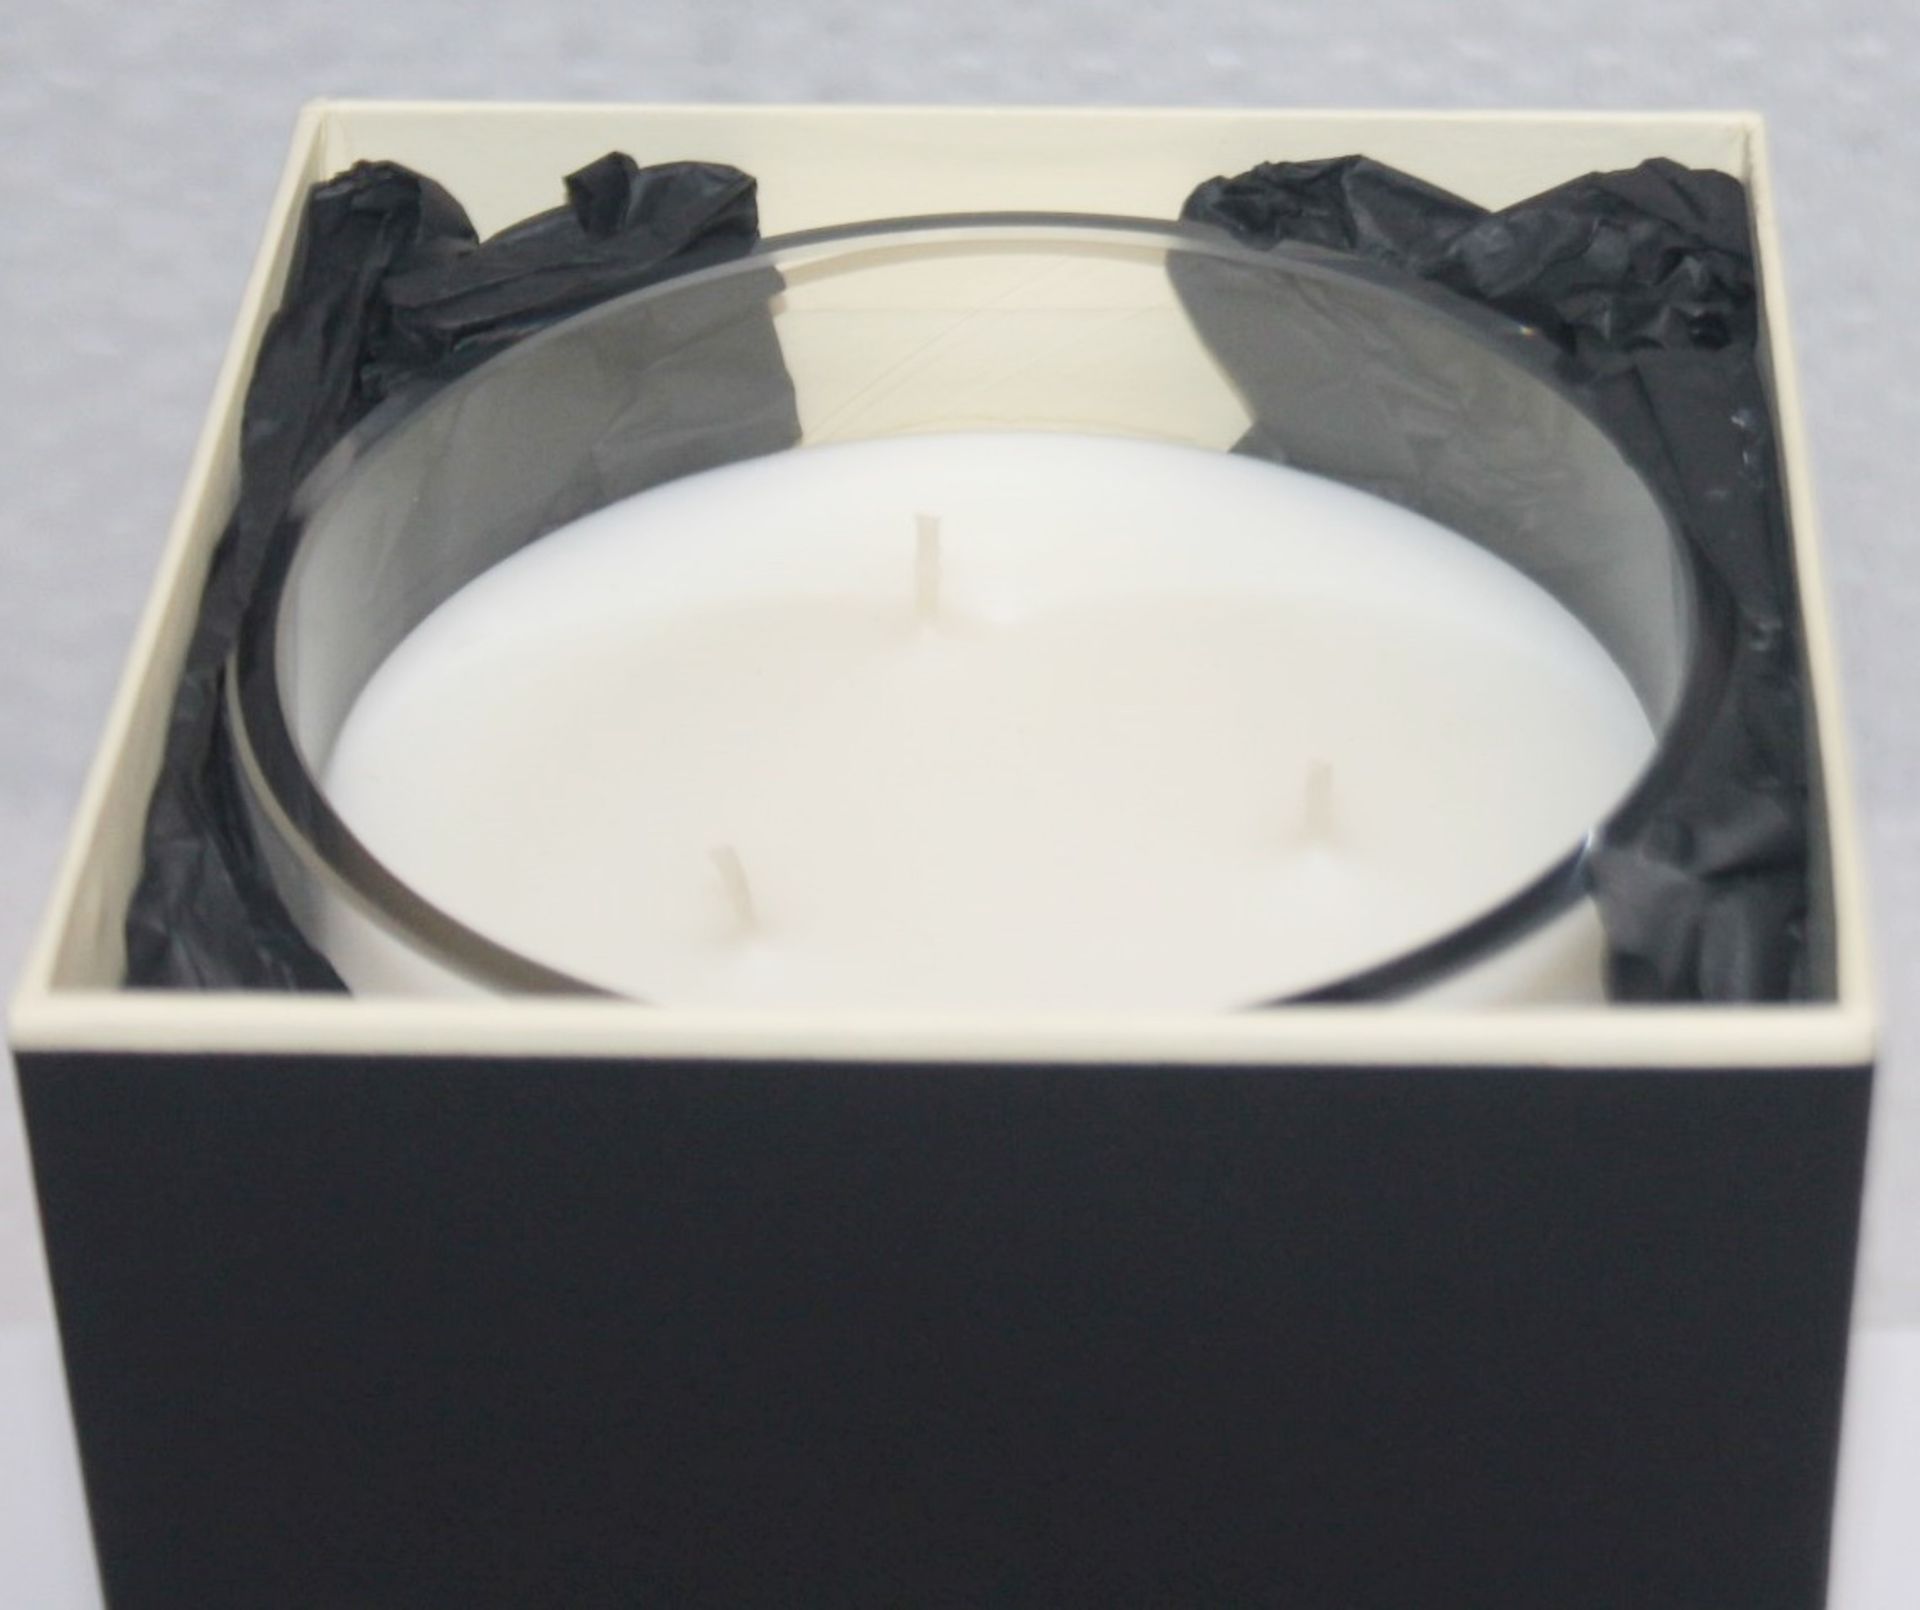 1 x JO MALONE LONDON Pomegranate Noir Deluxe Candle 600G - Original Price £140.00 - Ref: 6174821/ - Image 6 of 7